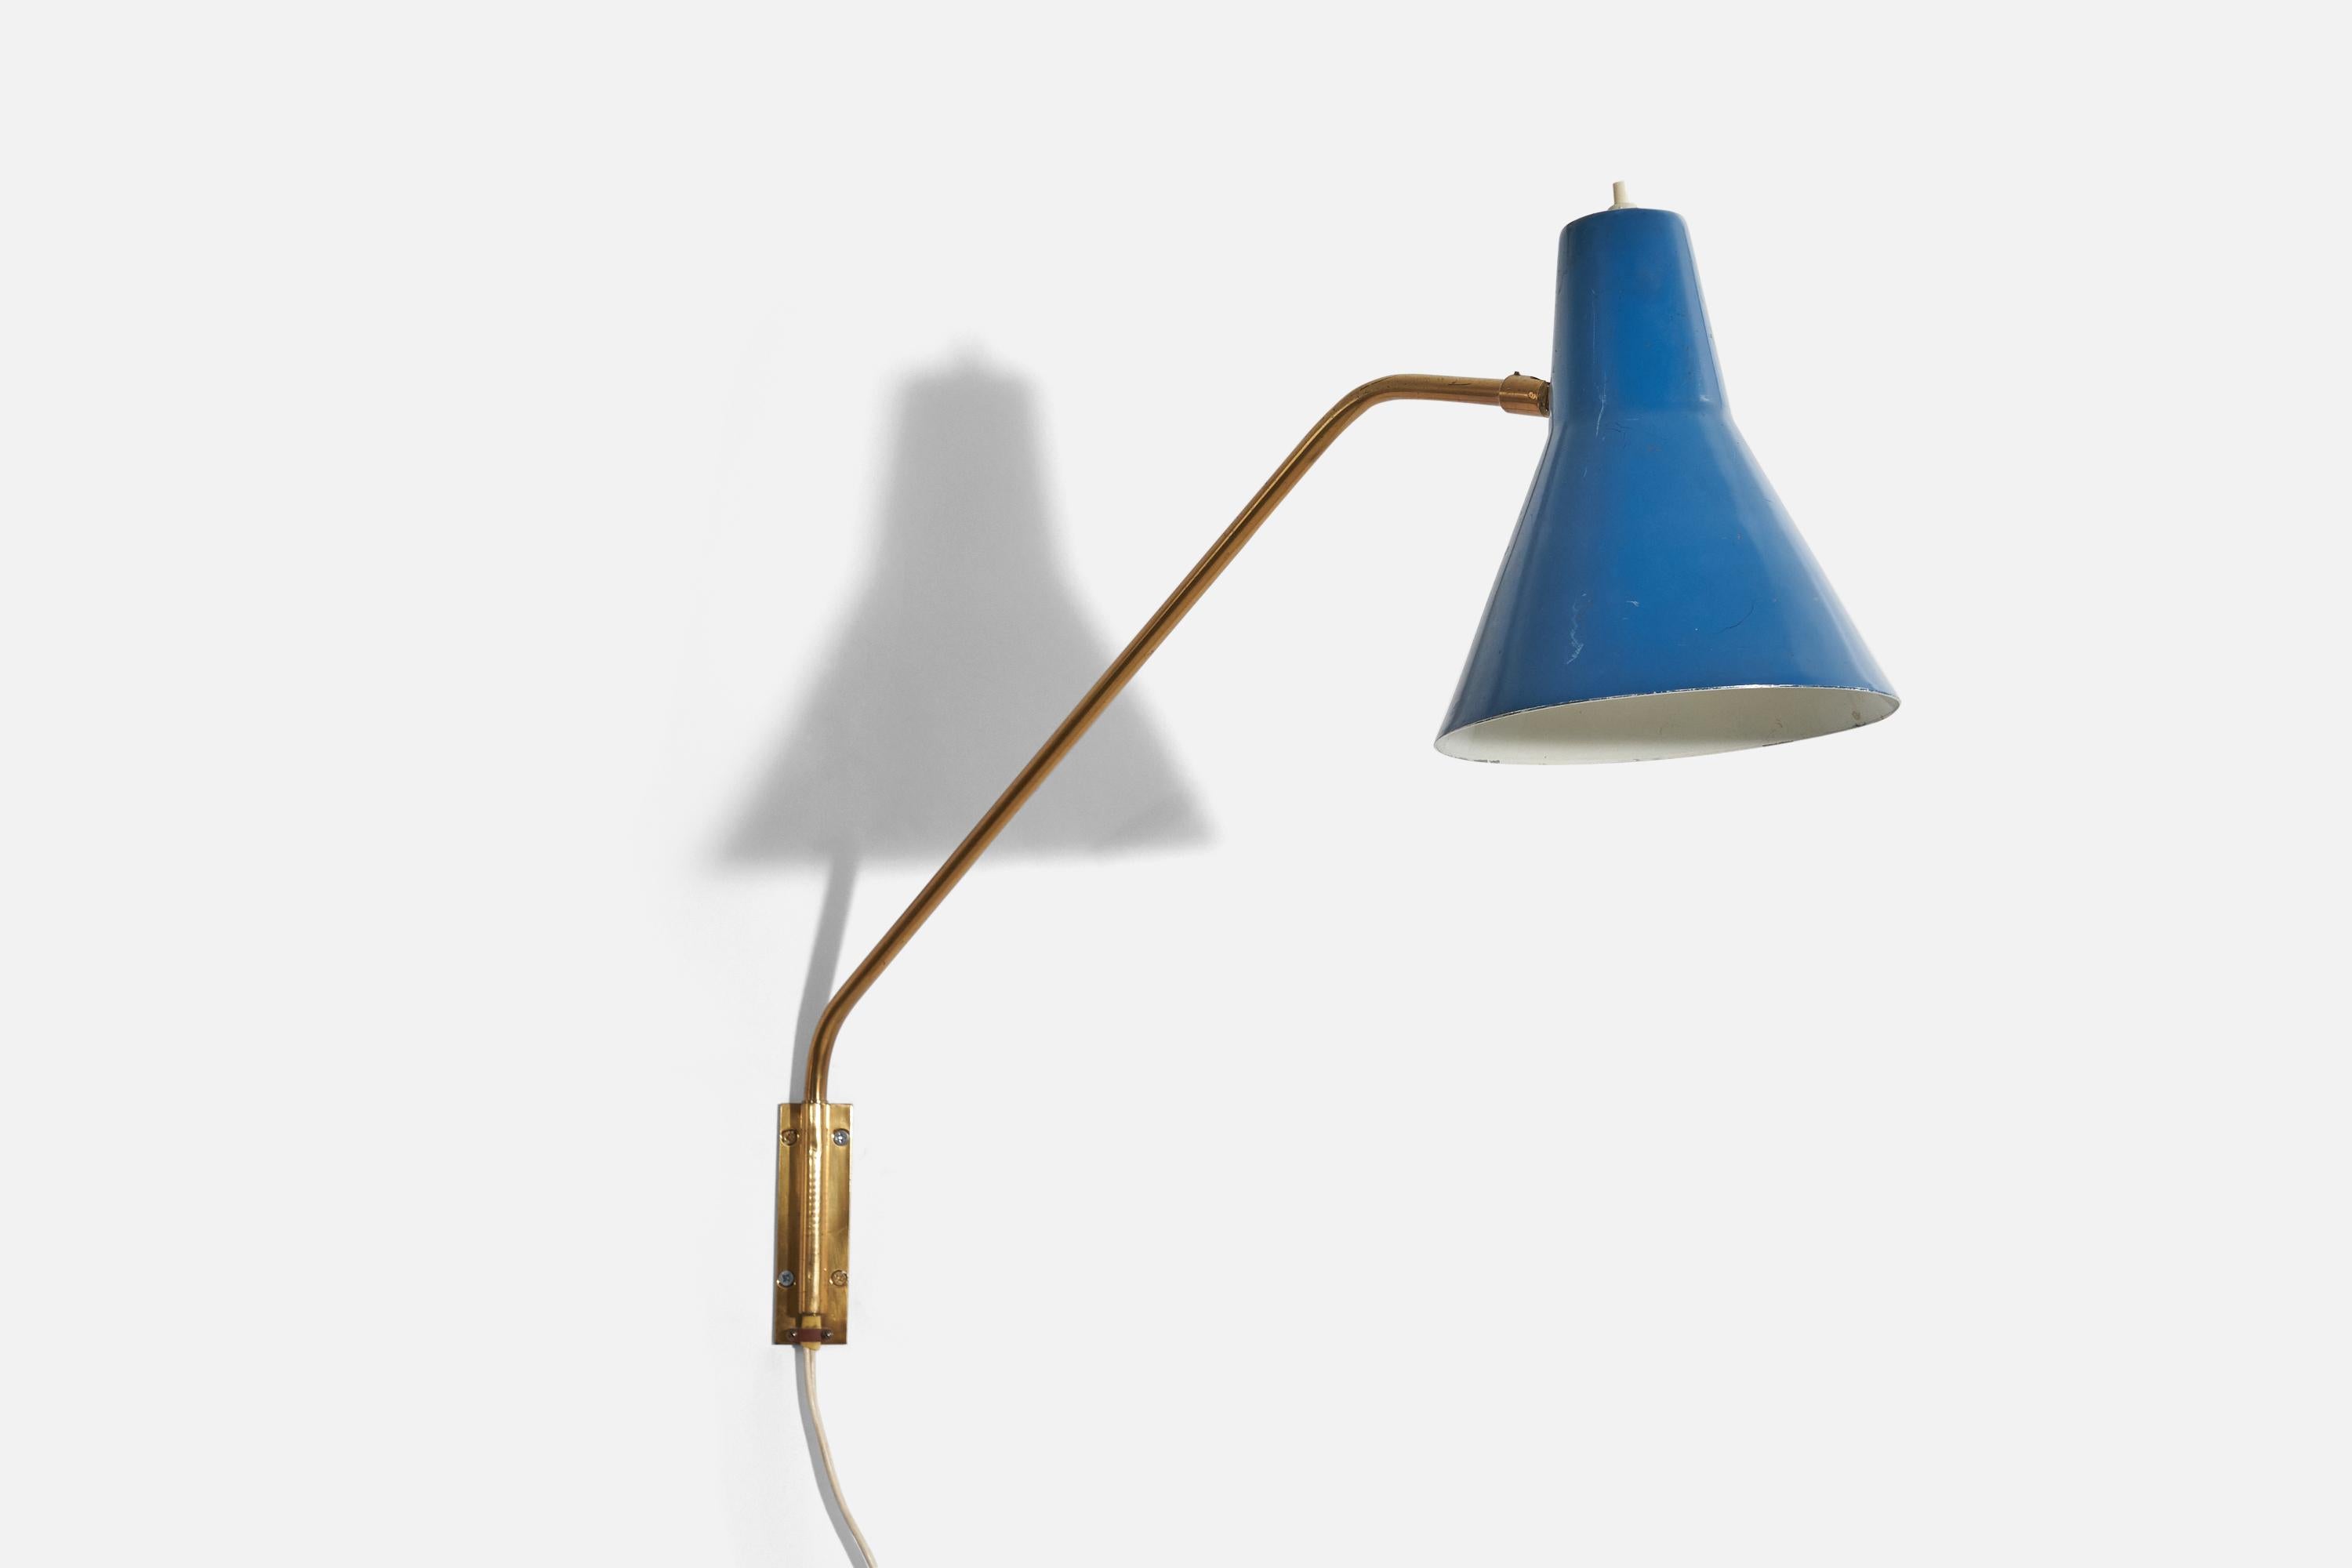 A brass and blue lacquered metal wall light, designed and produced in Italy, c. 1950s. 

Dimensions of back plate (inches) : 4.5625 x 1.375 x 0.125 (H x W x D)

Variable dimensions, measured as illustrated in the first image.